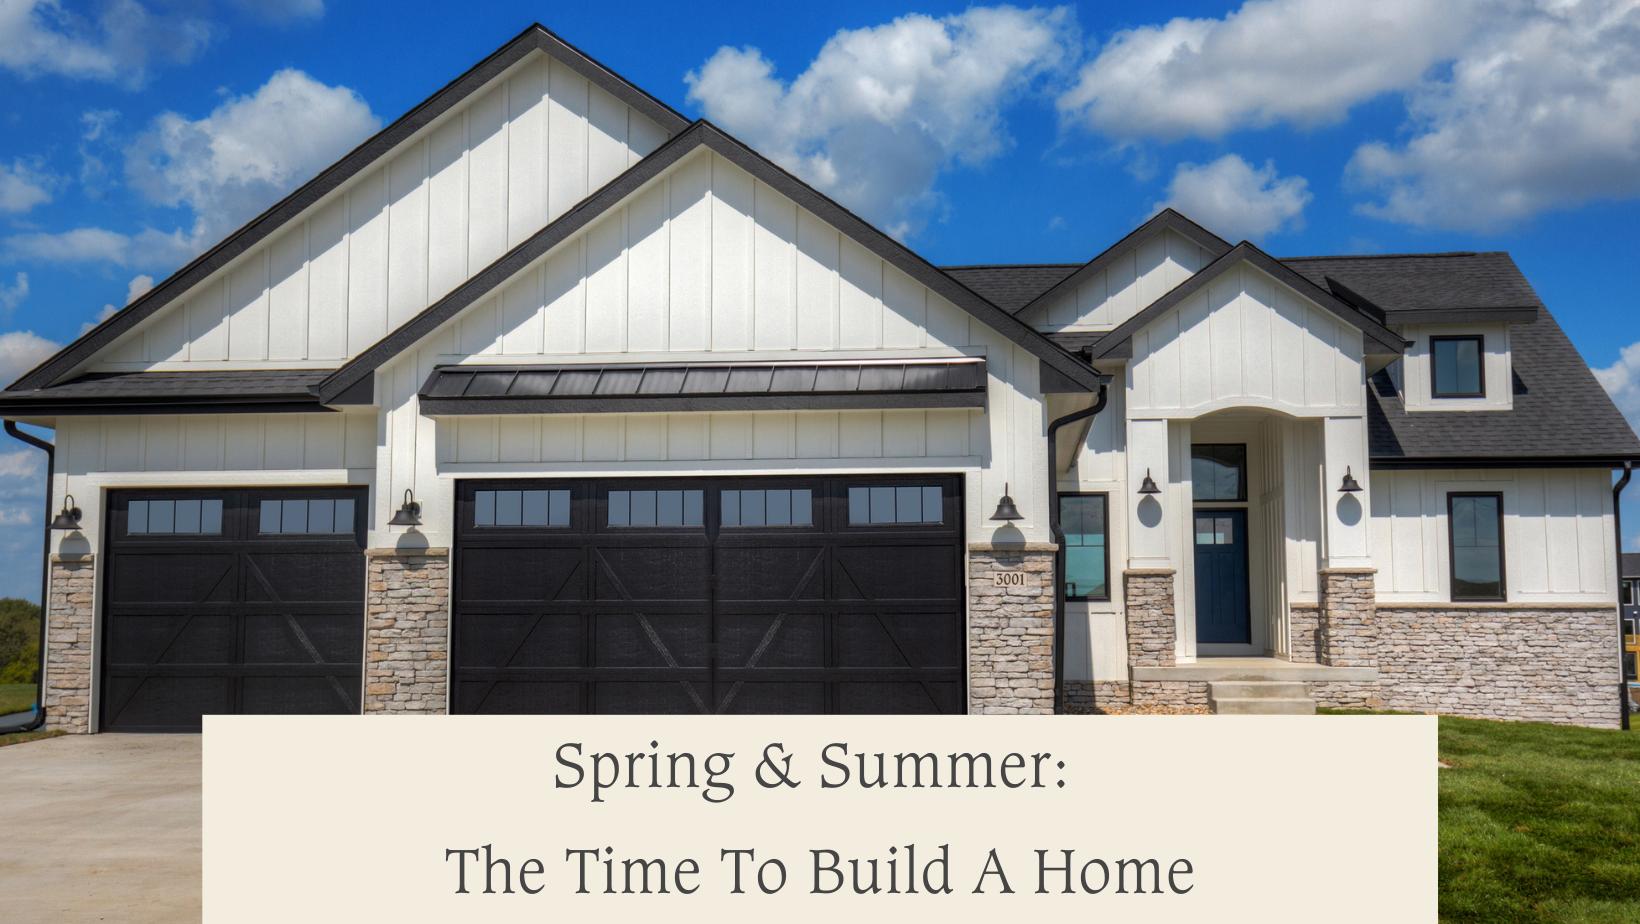 Spring and Summer:The time to build a home